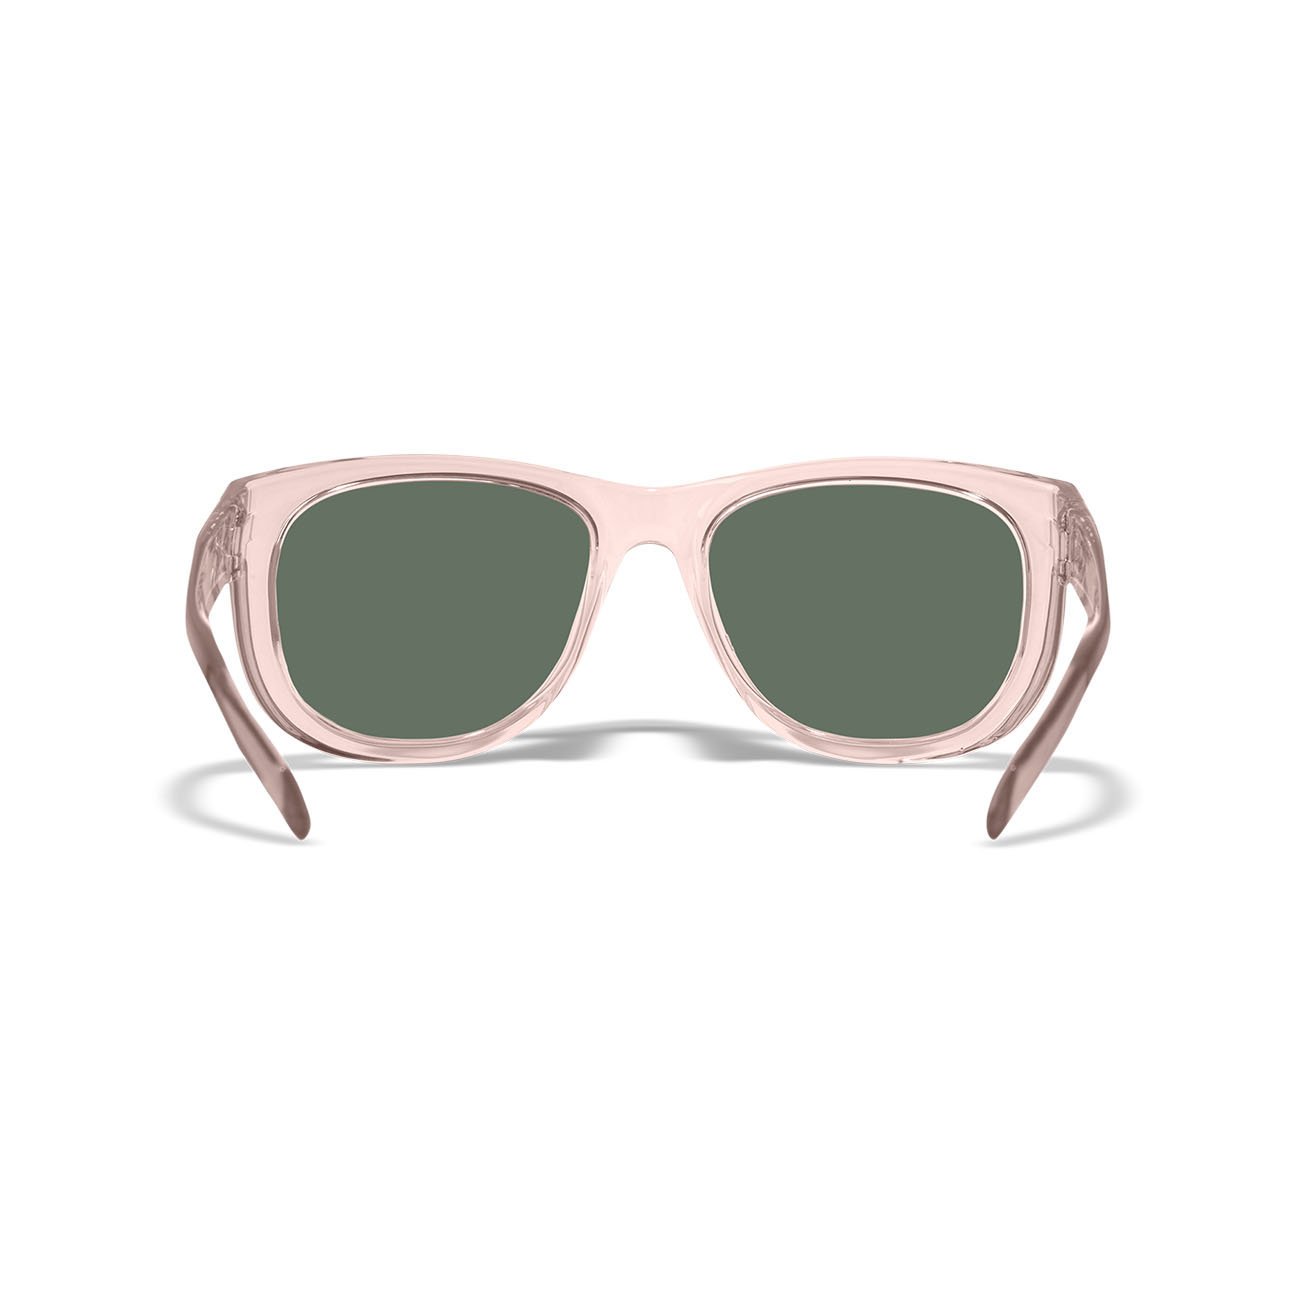 New Carp Shop Europe Wiley X – WEEKENDER Captivate Pol Rose Gold Mirror Green Crystal Blush Frame